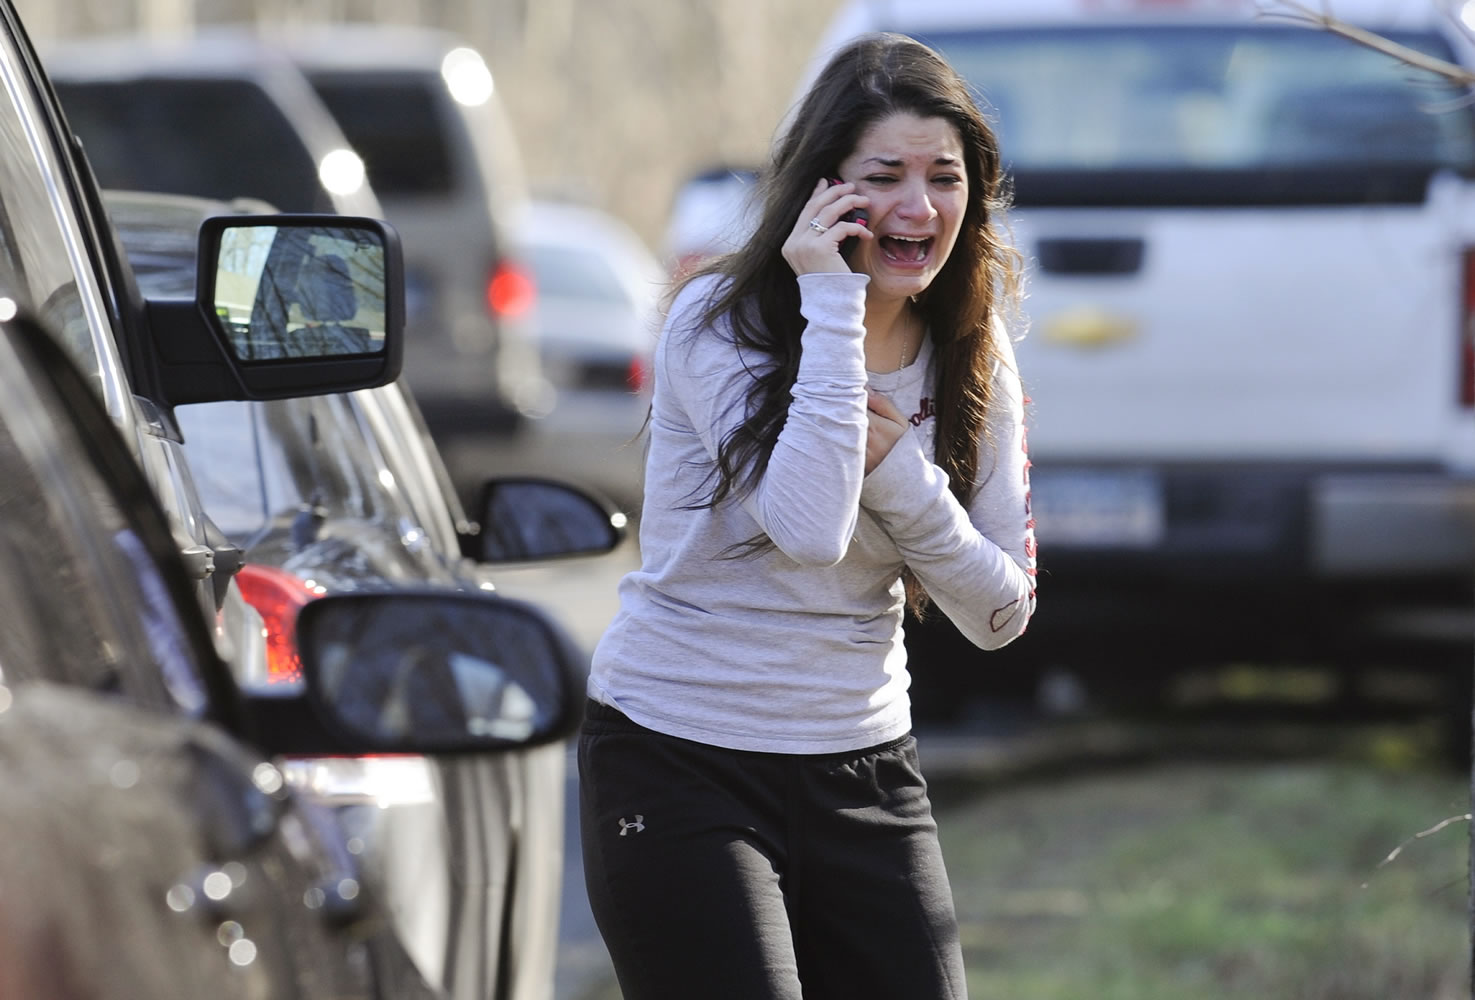 Jillian Soto uses a phone to get information about her sister, Victoria Soto, a teacher at the Sandy Hook elementary school in Newtown, Conn., on Friday after a gunman killed over two dozen people, including 20 children.